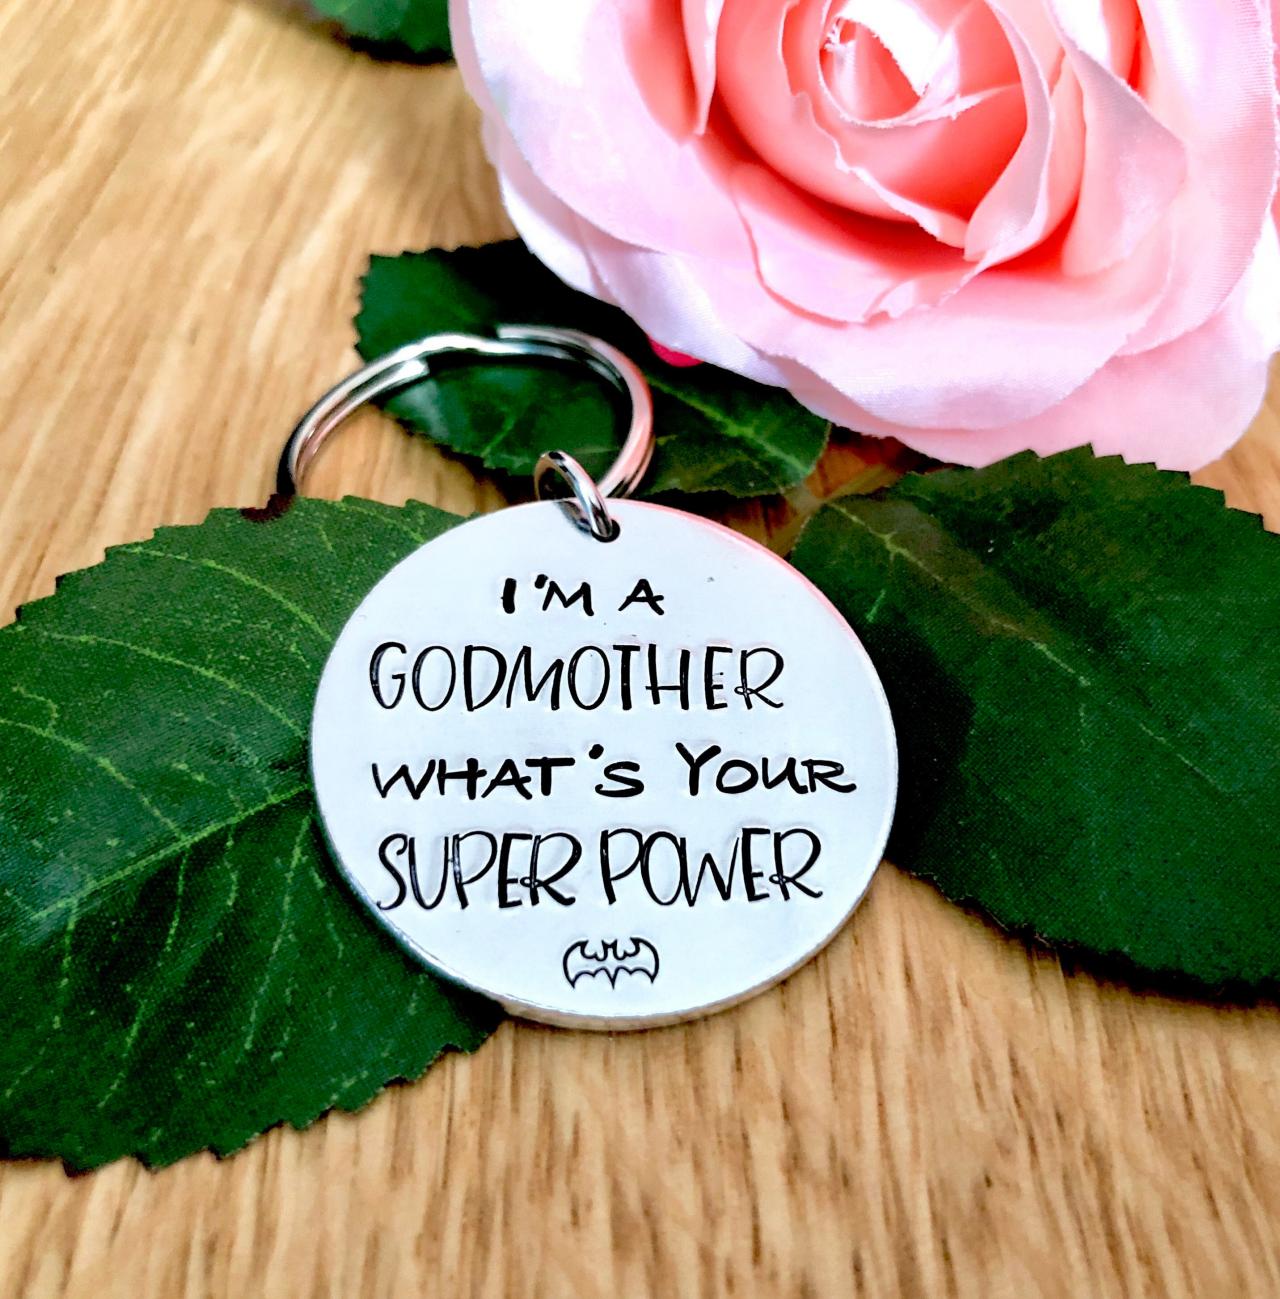 I'm a Godmother whats your superpower?, godmother gift, christening gift, godparent gift, godmother, godmother present, guardian gift